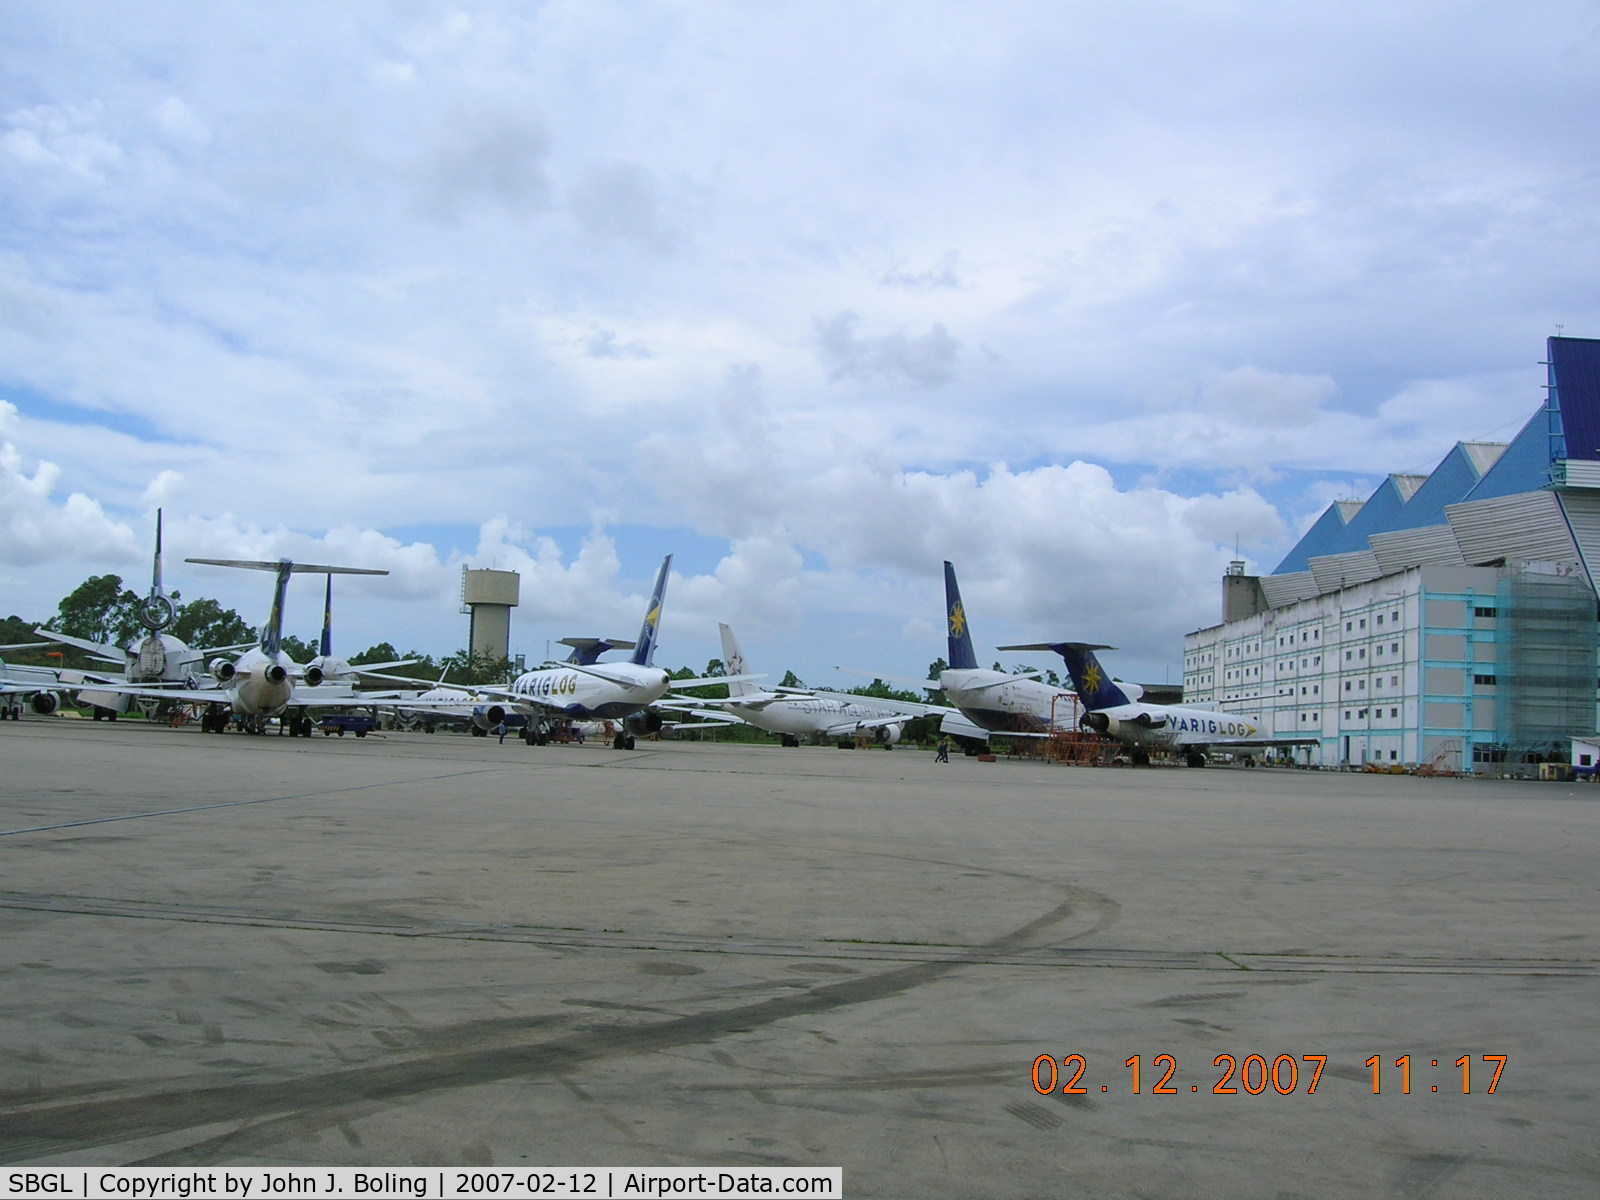 Galeão Airport, Antônio Carlos Jobim International Airport Brazil (SBGL) - Former Varig aircraft parked at Rio. Ramp/hangar has six 727s, five 737s, one 757, four 767s, two 777s,five MD-11s, one DC-10F.